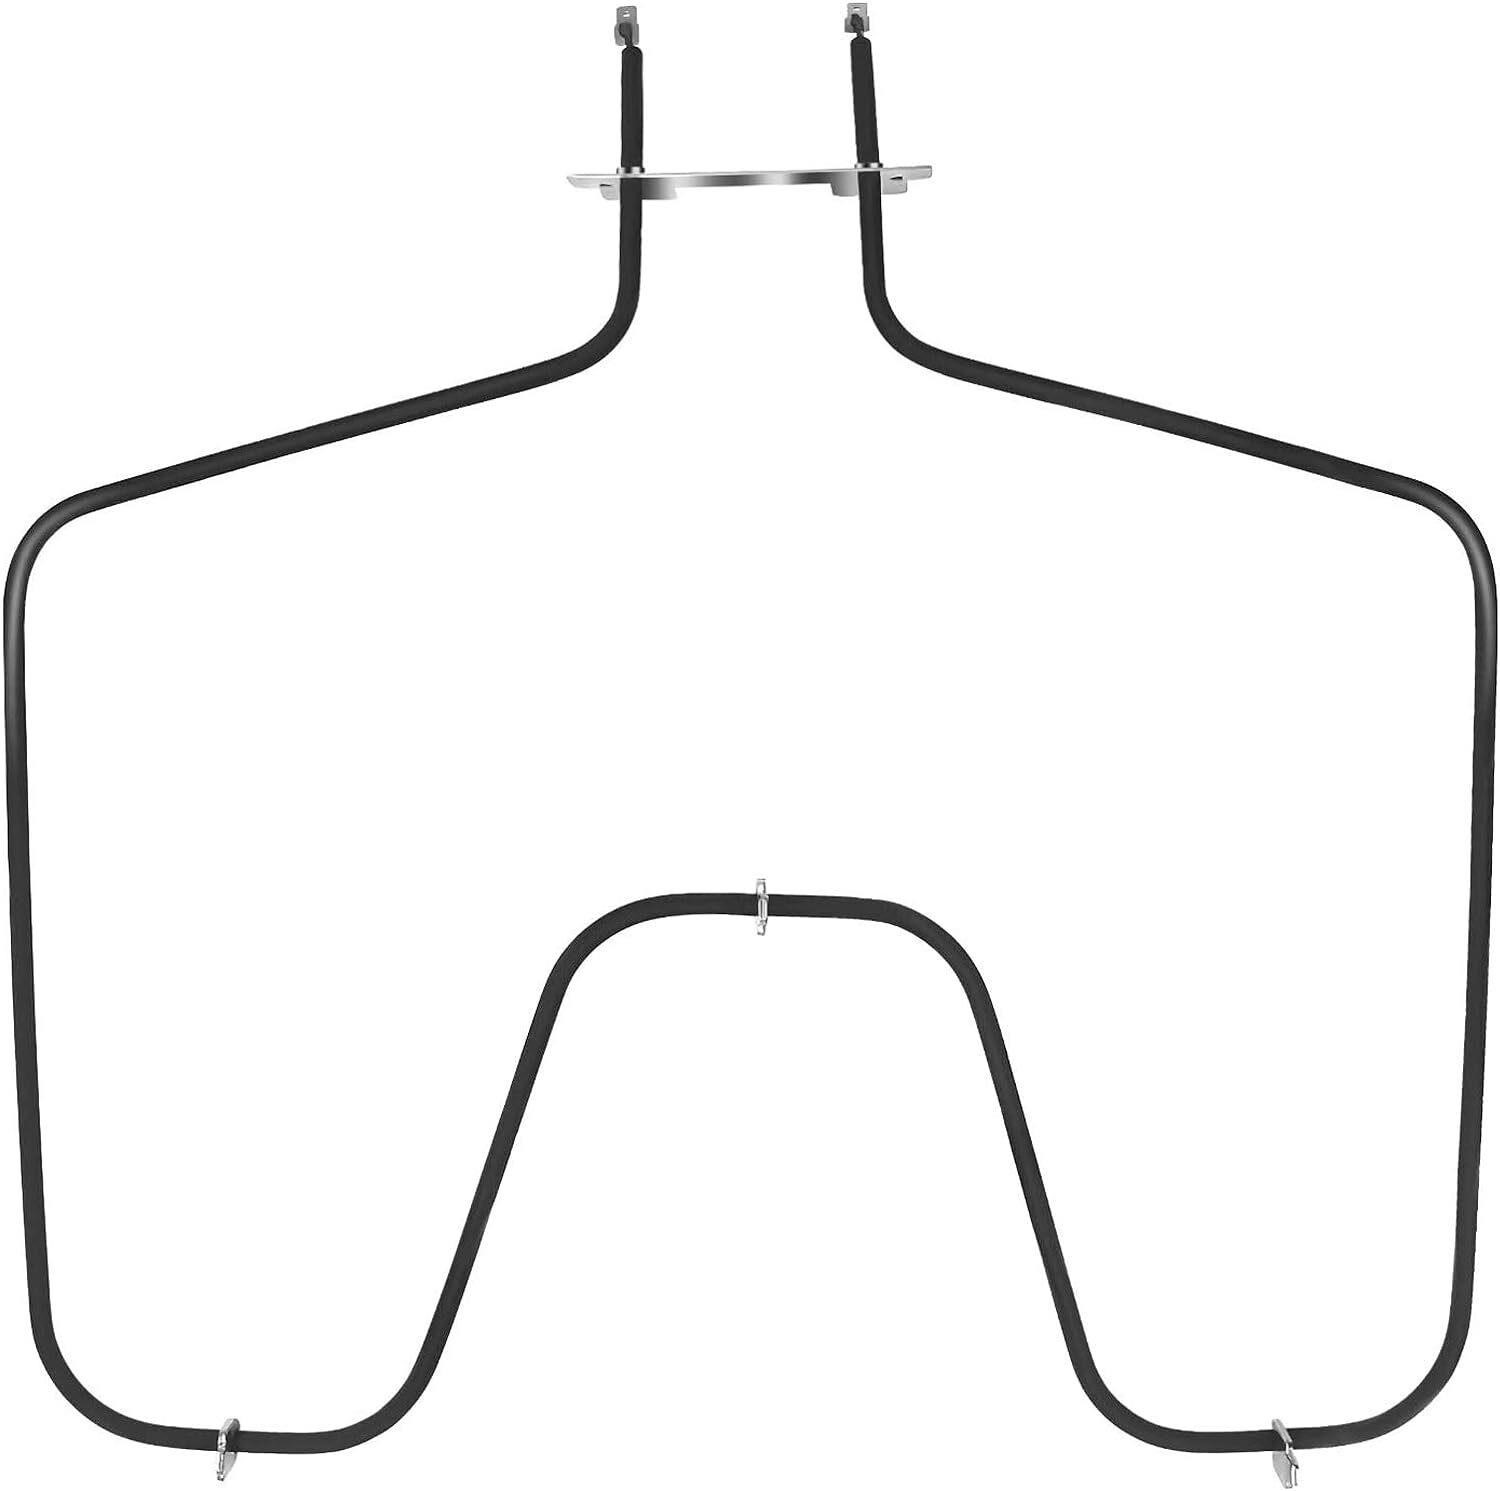 Beaquicy WB44K10005 Oven Bake Element Suitable for